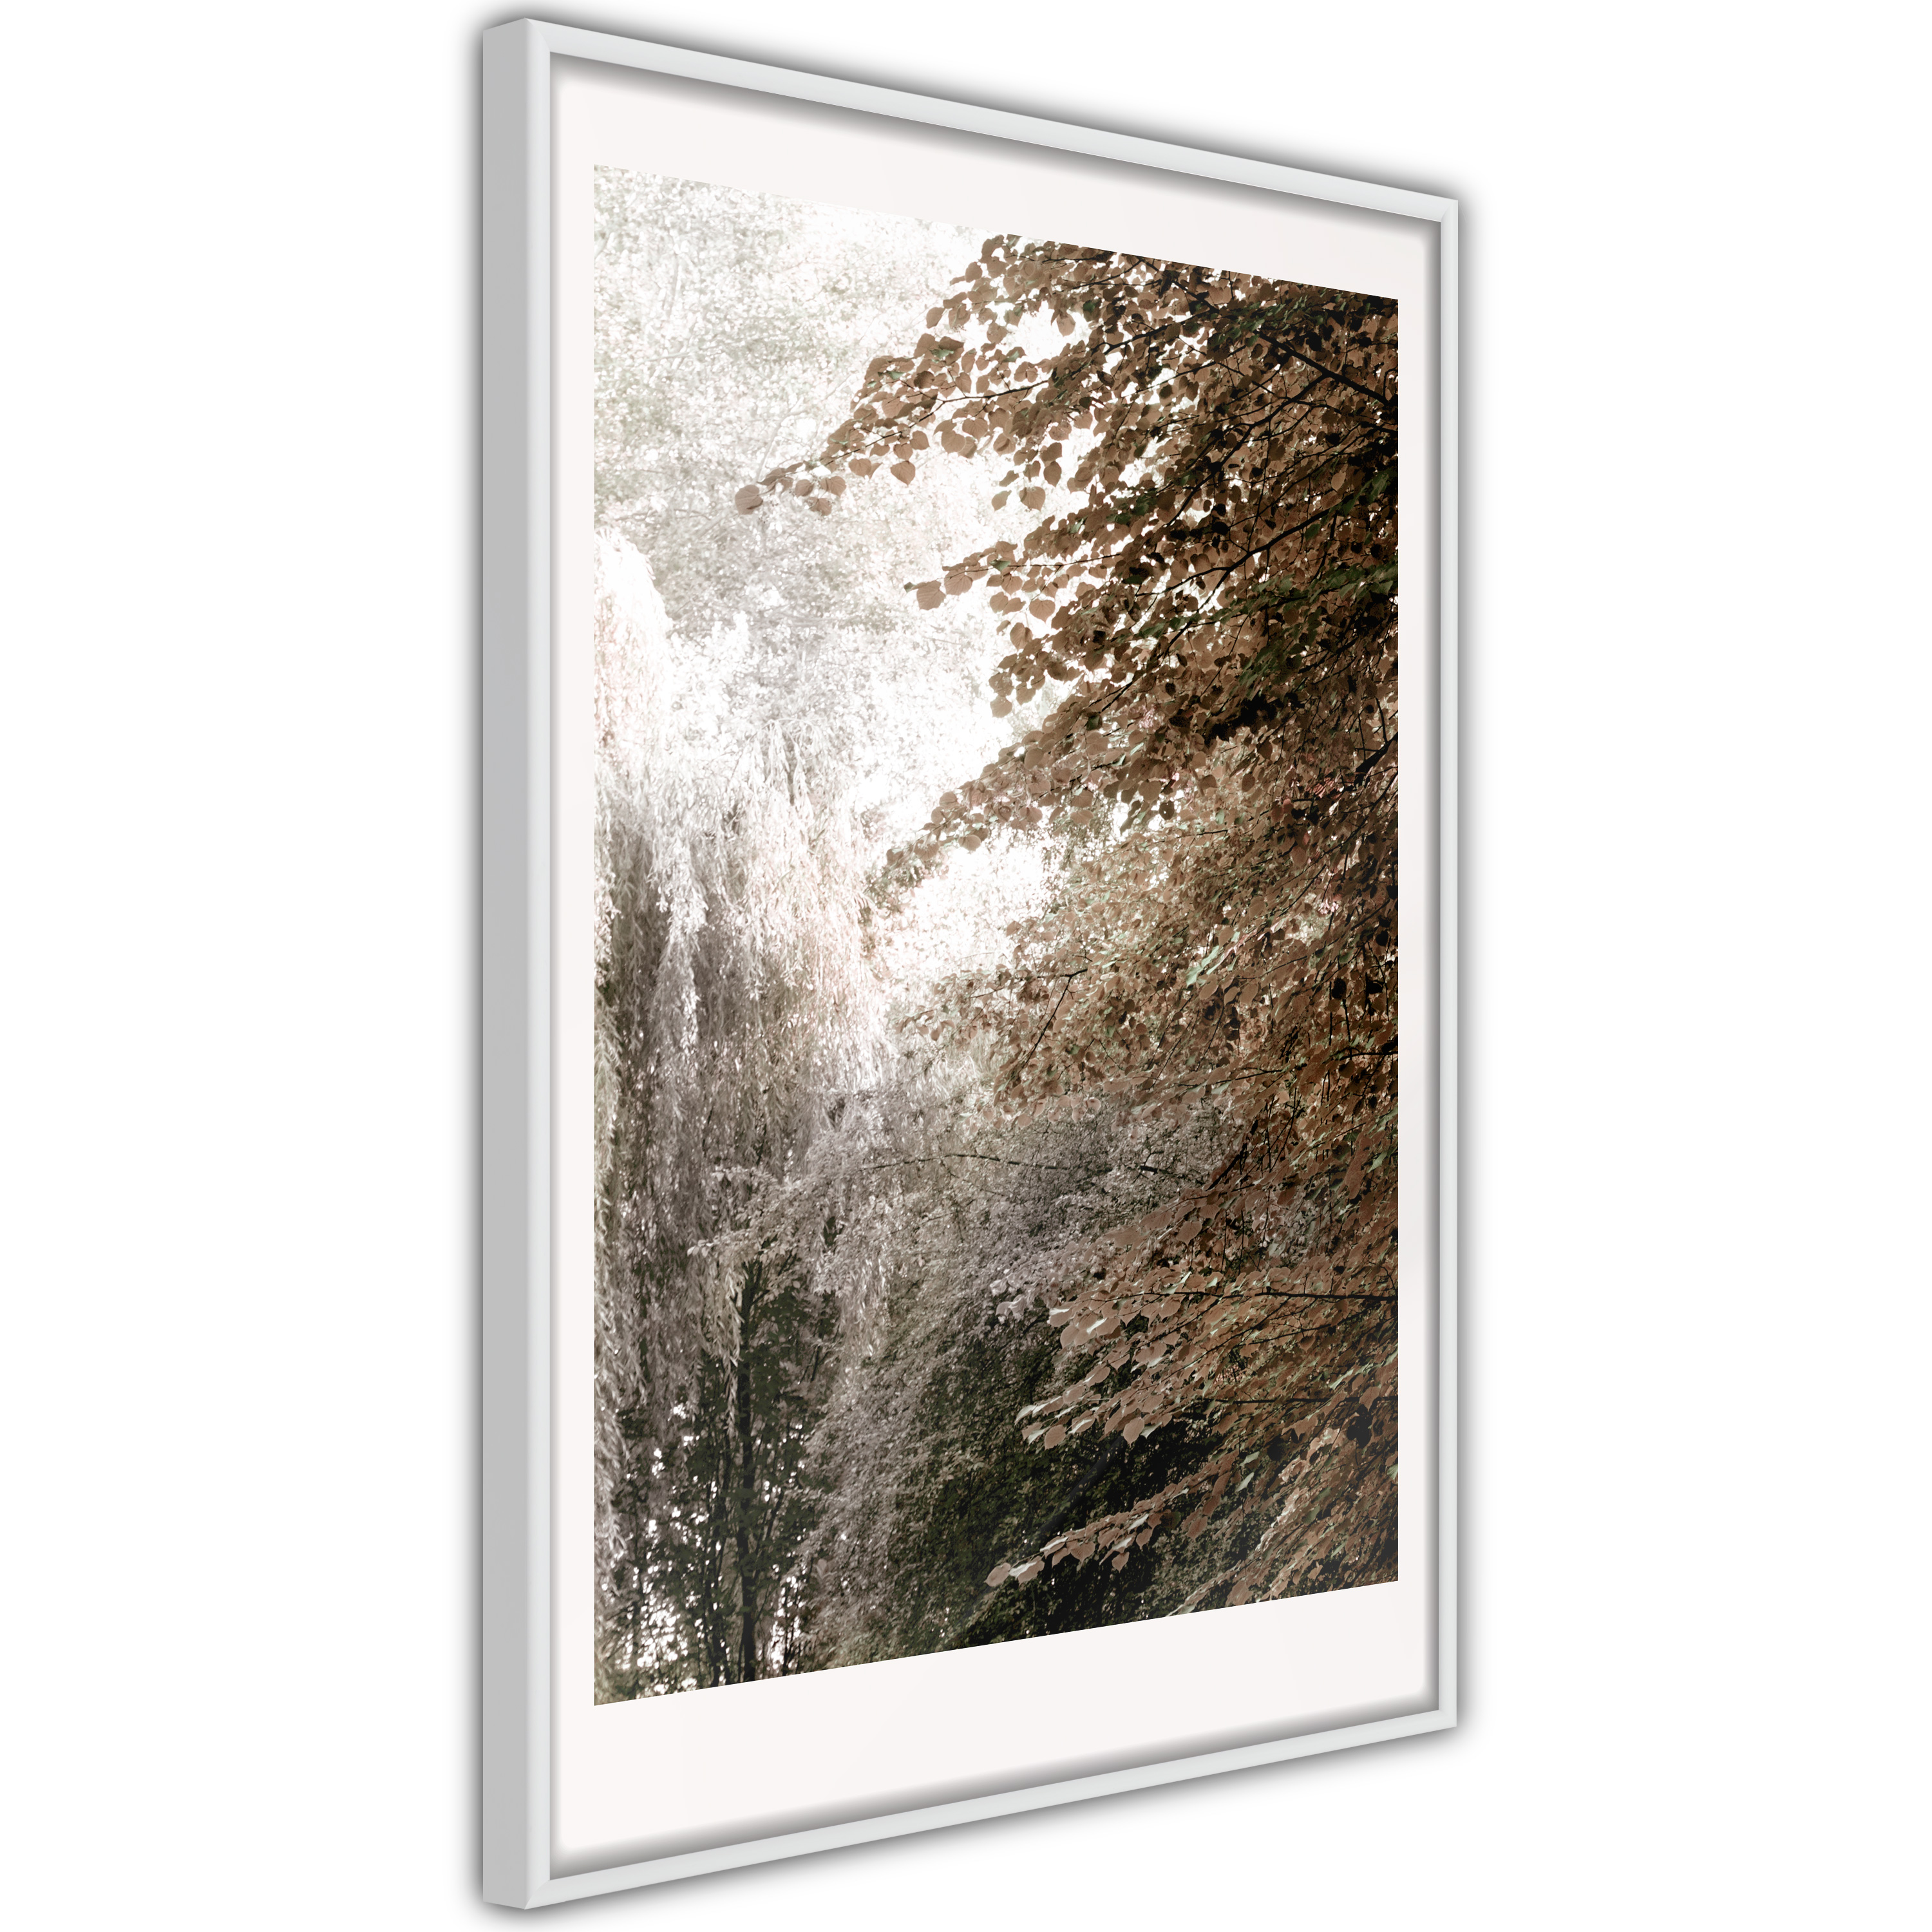 Poster - Pond in the Park - 40x60